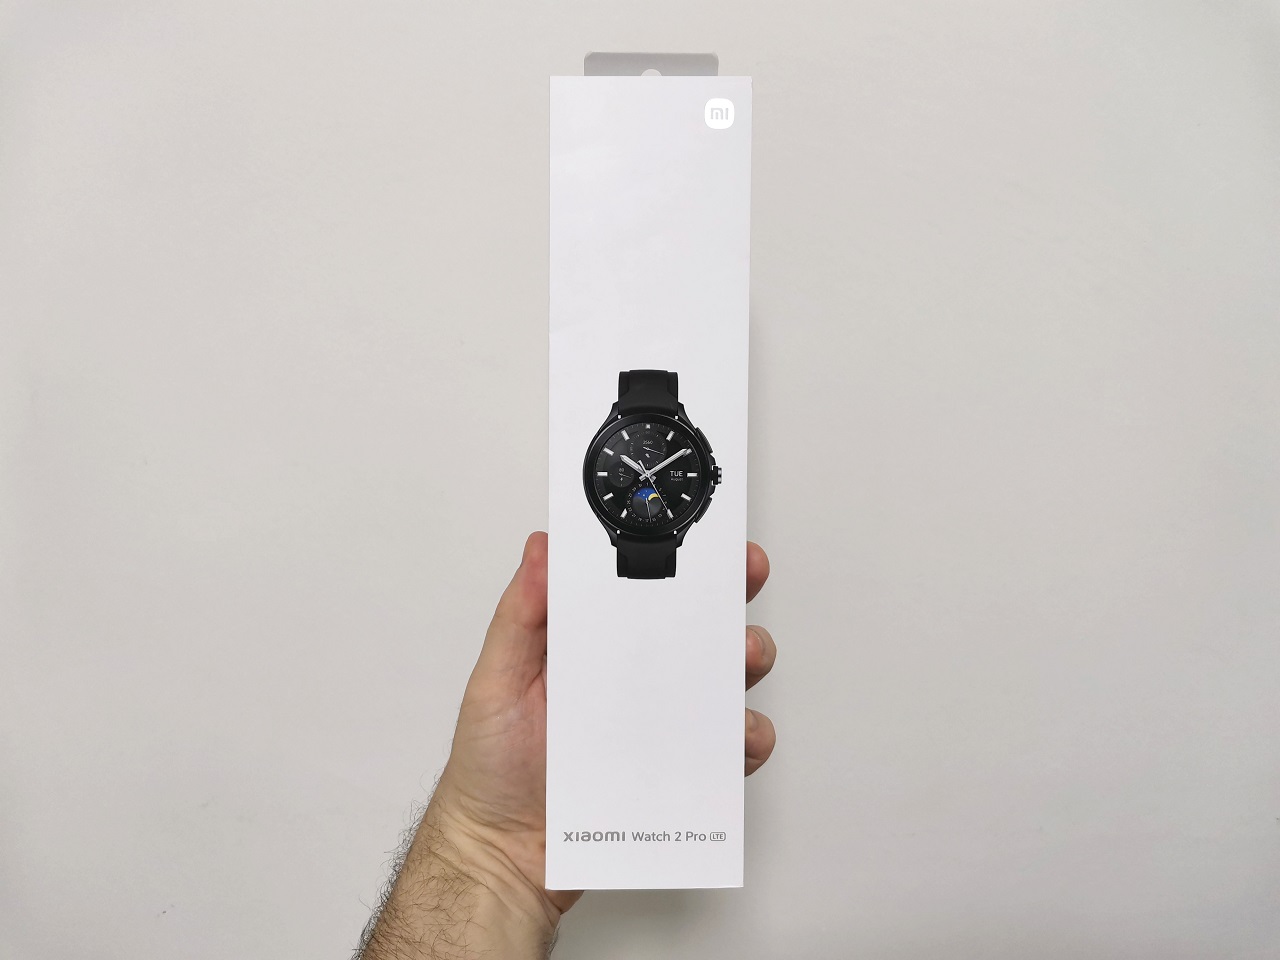 Xiaomi Watch 2 Pro Review: Great value and beauty